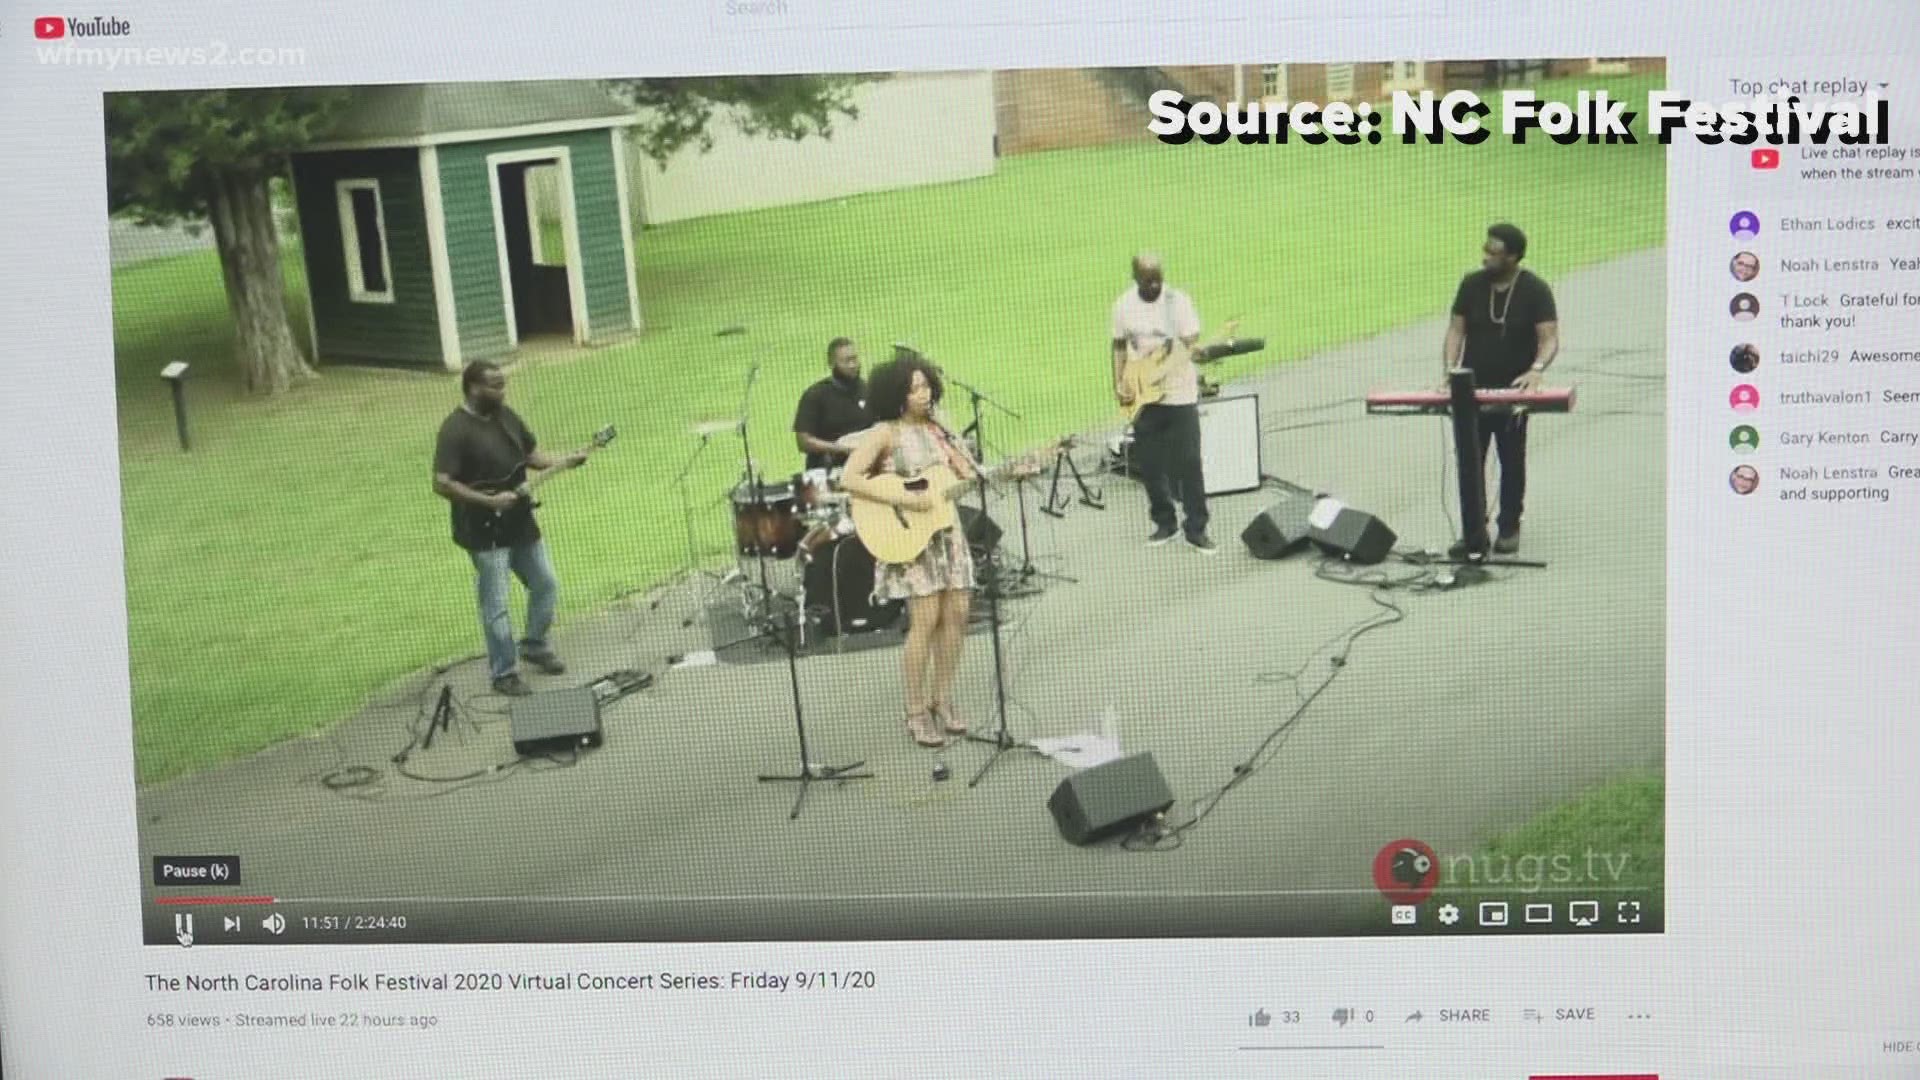 Typically, the NC Folk Fest brings thousands of people to Greensboro, but this year people are watching online.